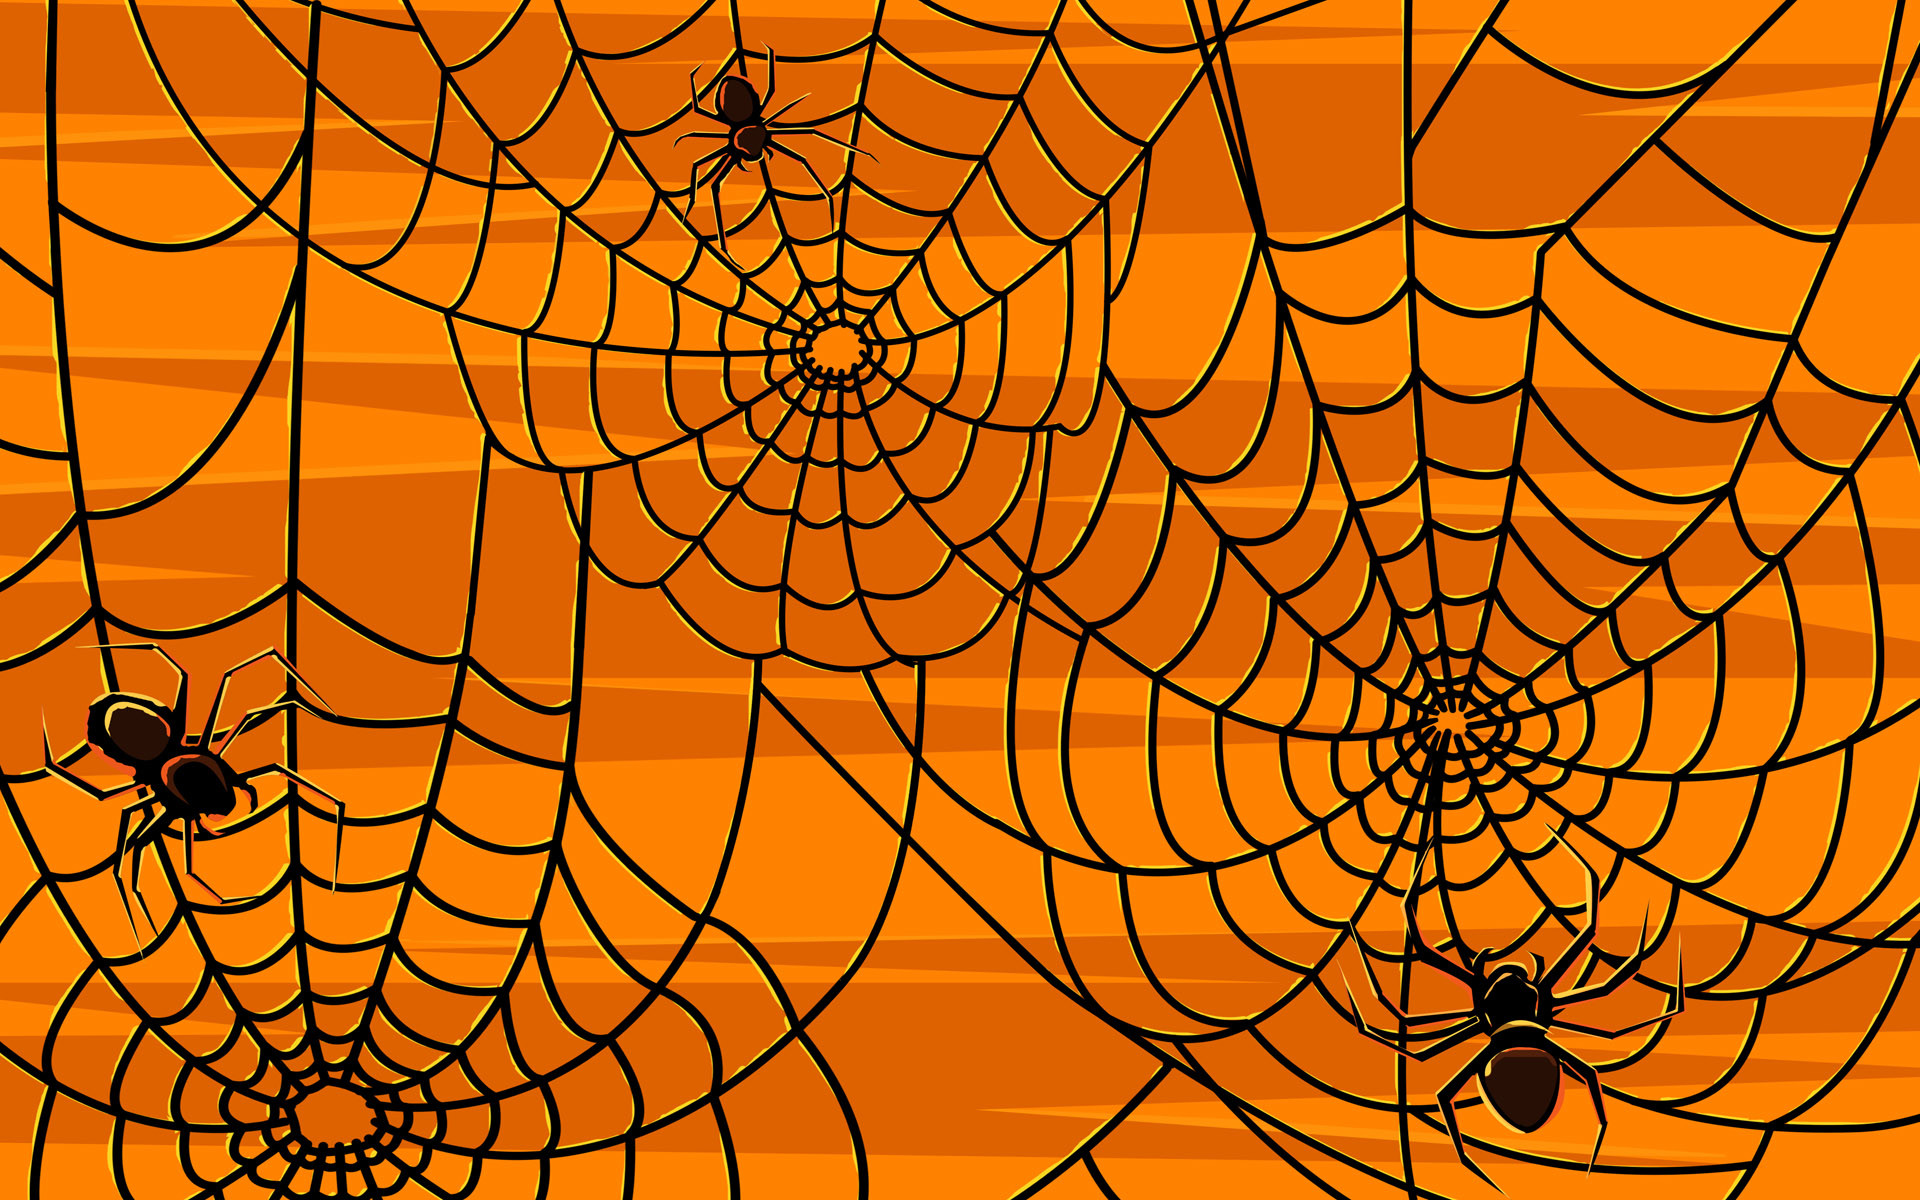 45 Scary Halloween 2012 HD Wallpapers Pumpkins, Witches, Spider Web